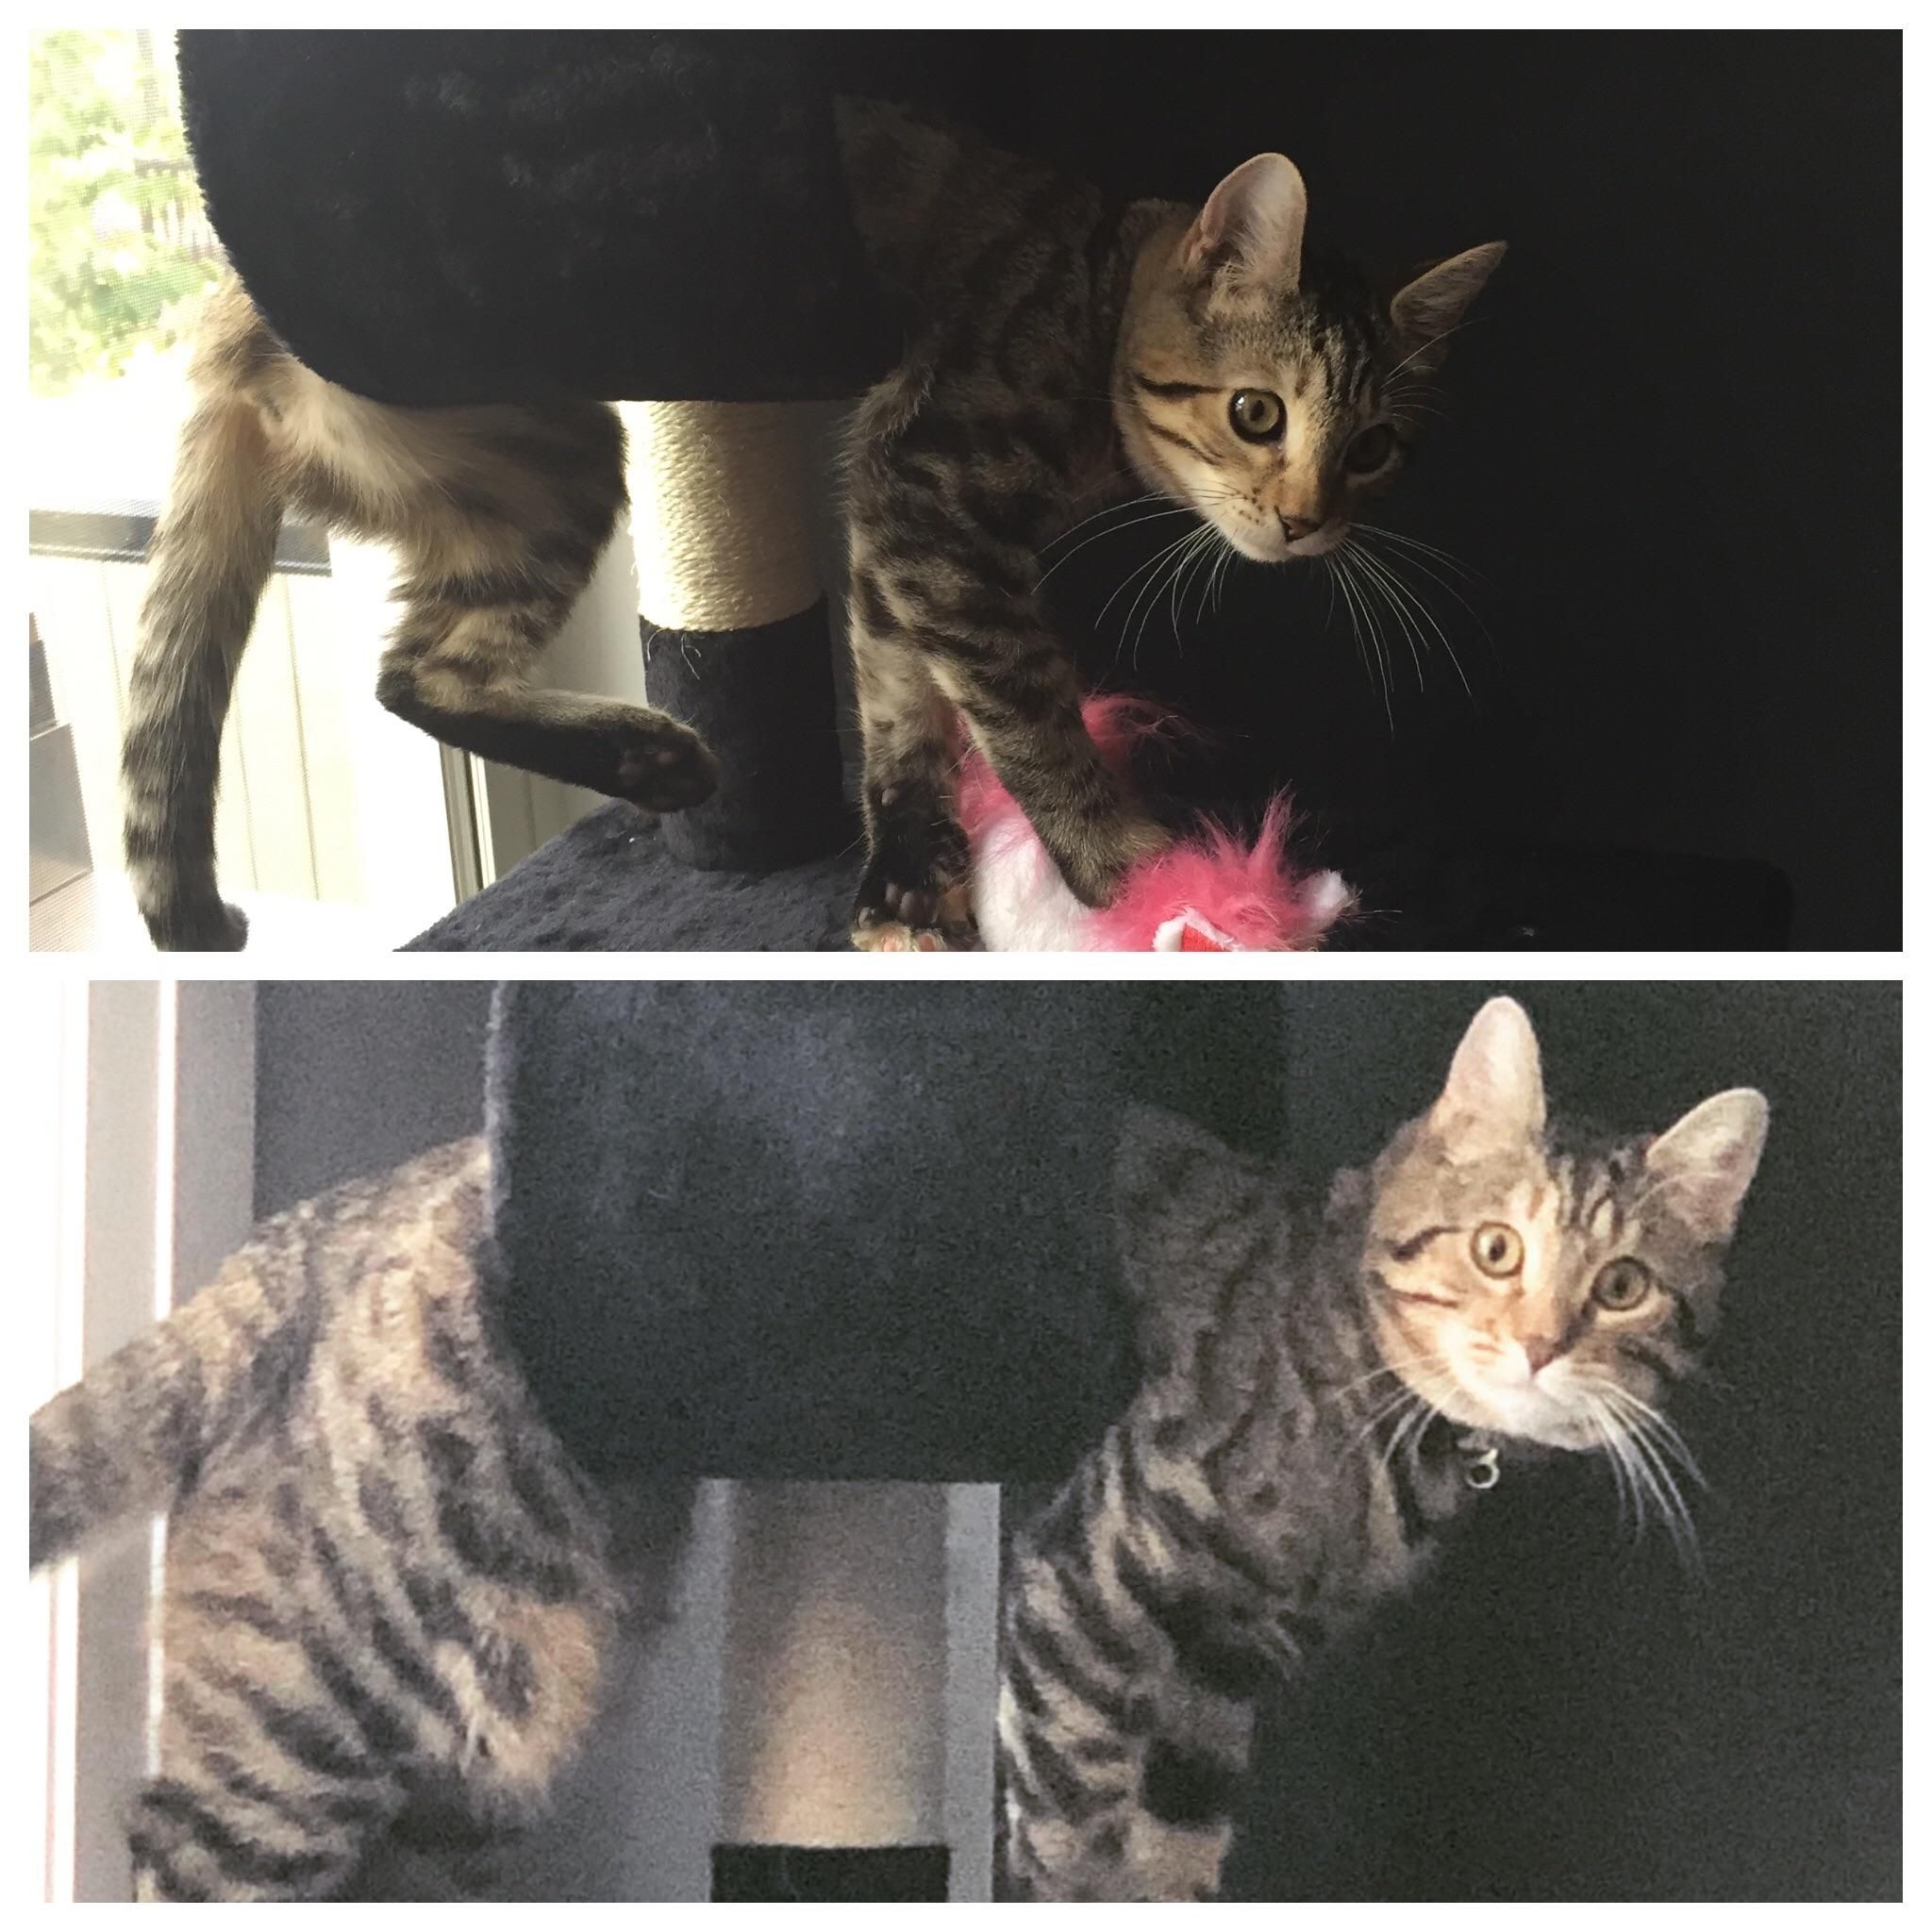 Today my cat decided to recreate her picture from 5 months ago.